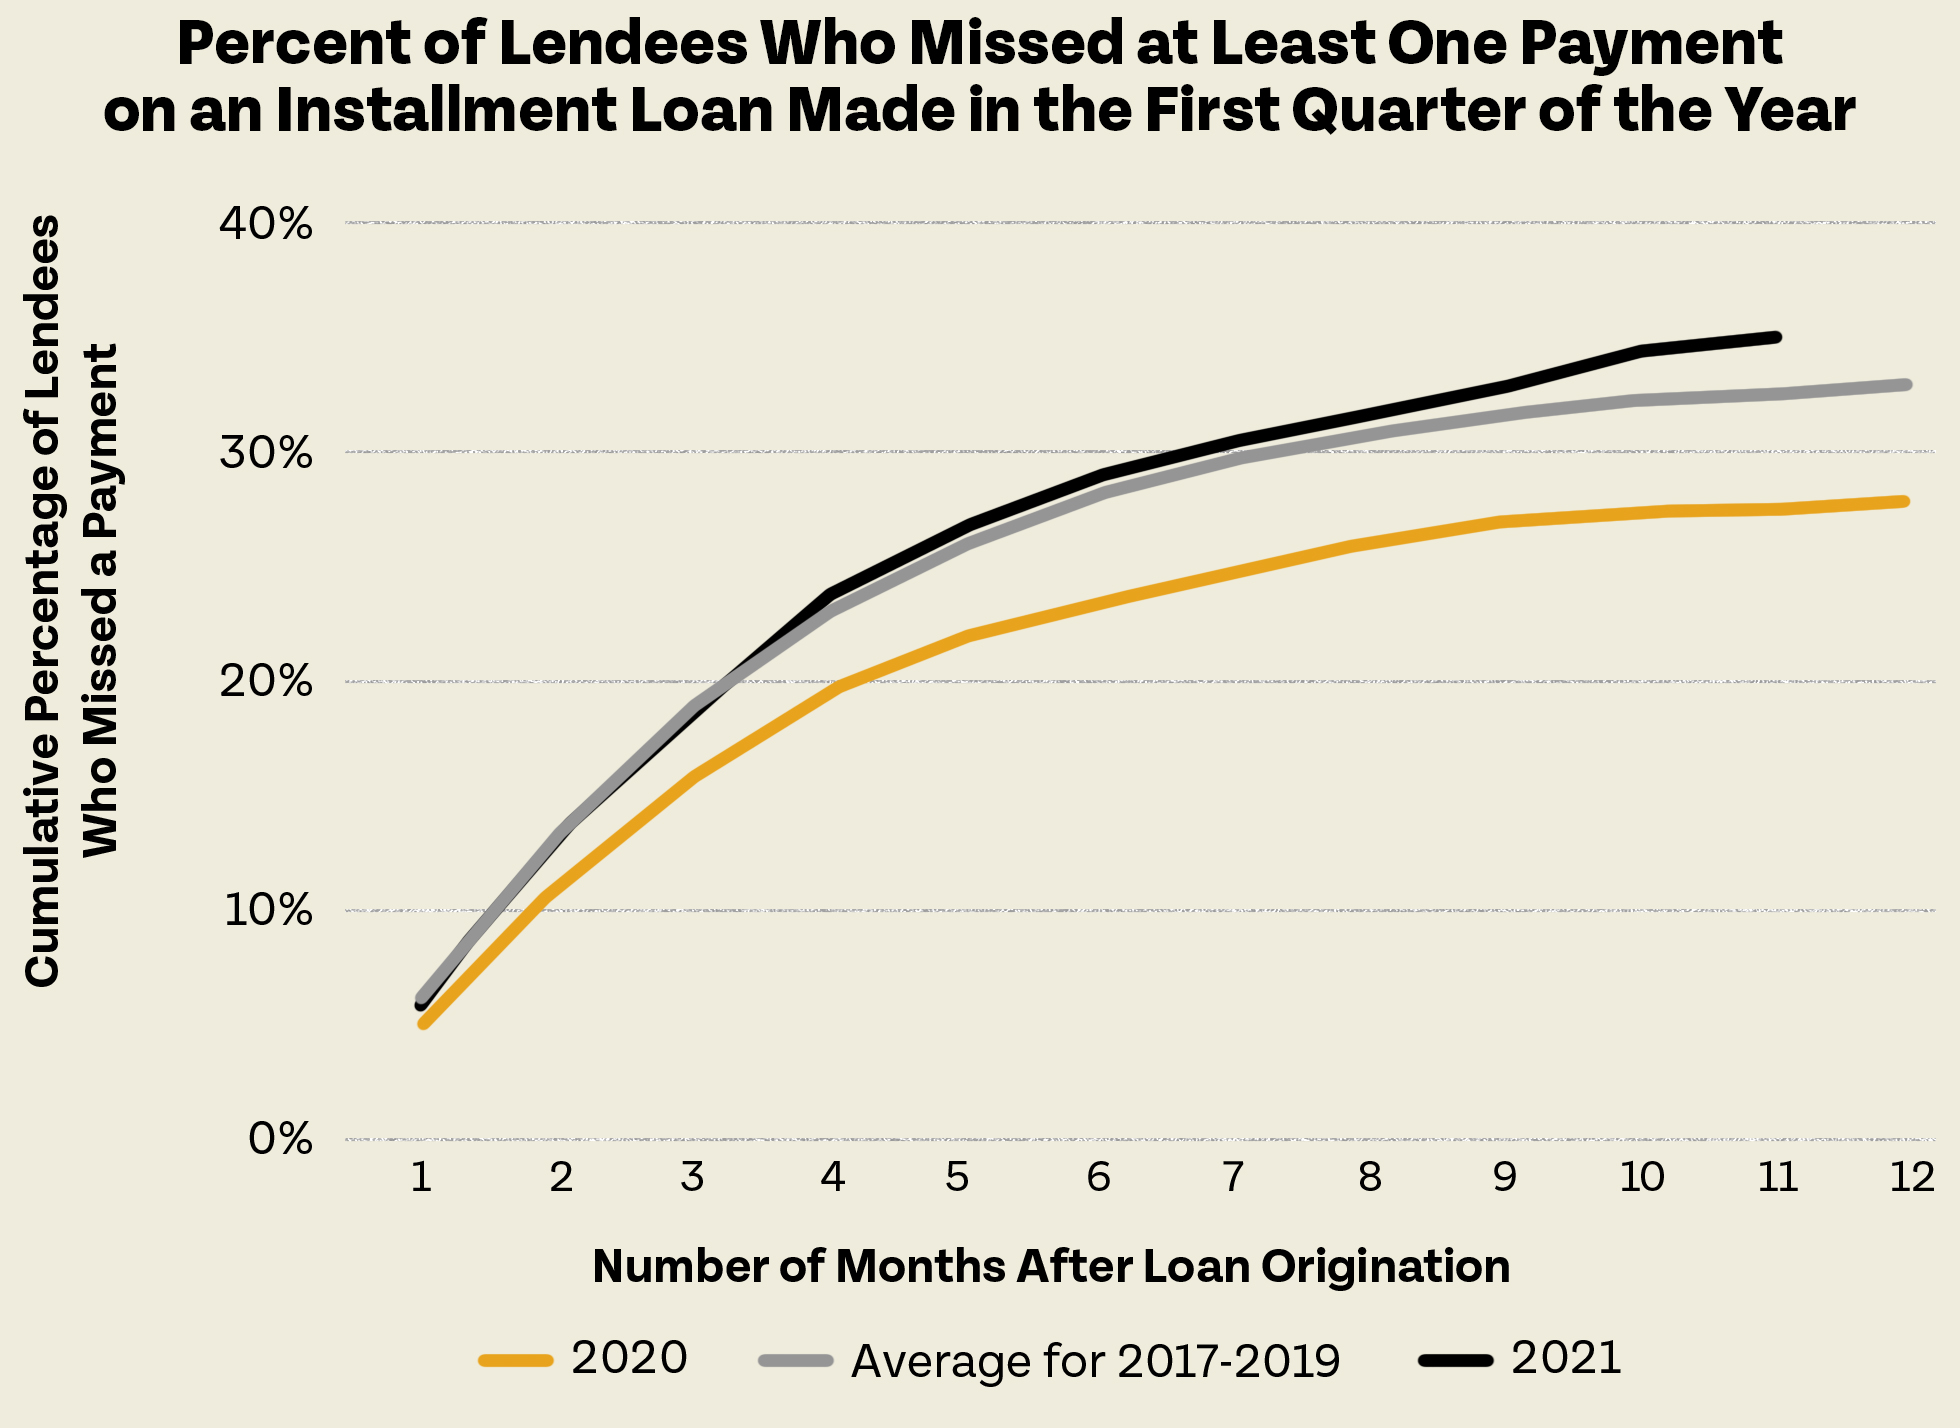 Percent of Lendees who missed at least one payment on an installment loan made in the first quarter of the year